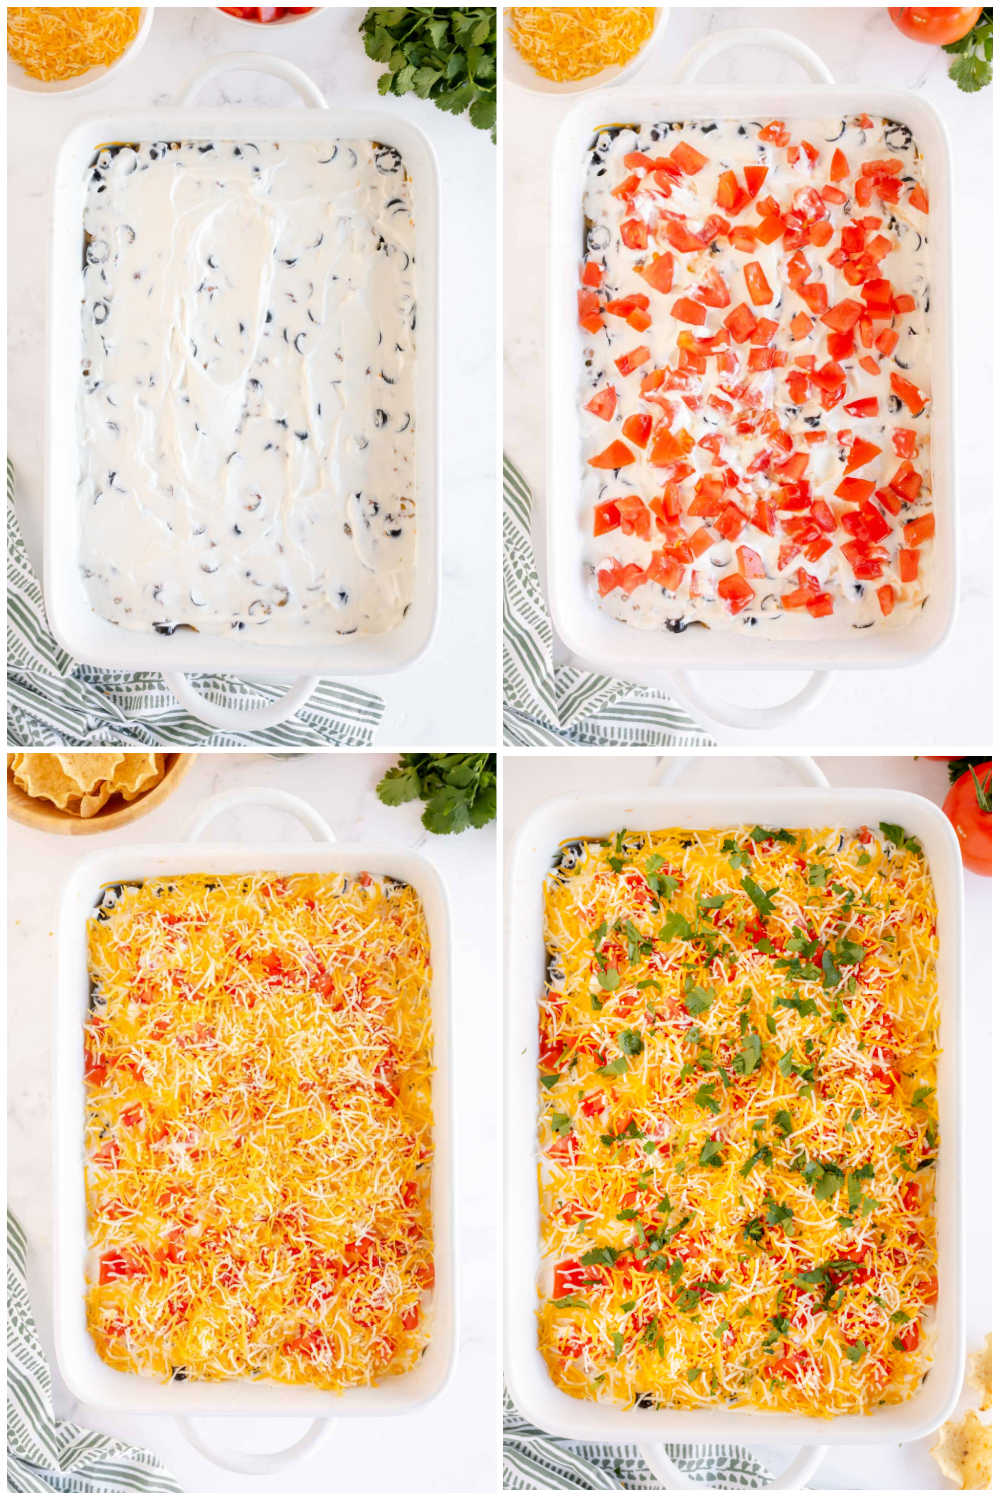 Baking dish with step by step photos for taco dip